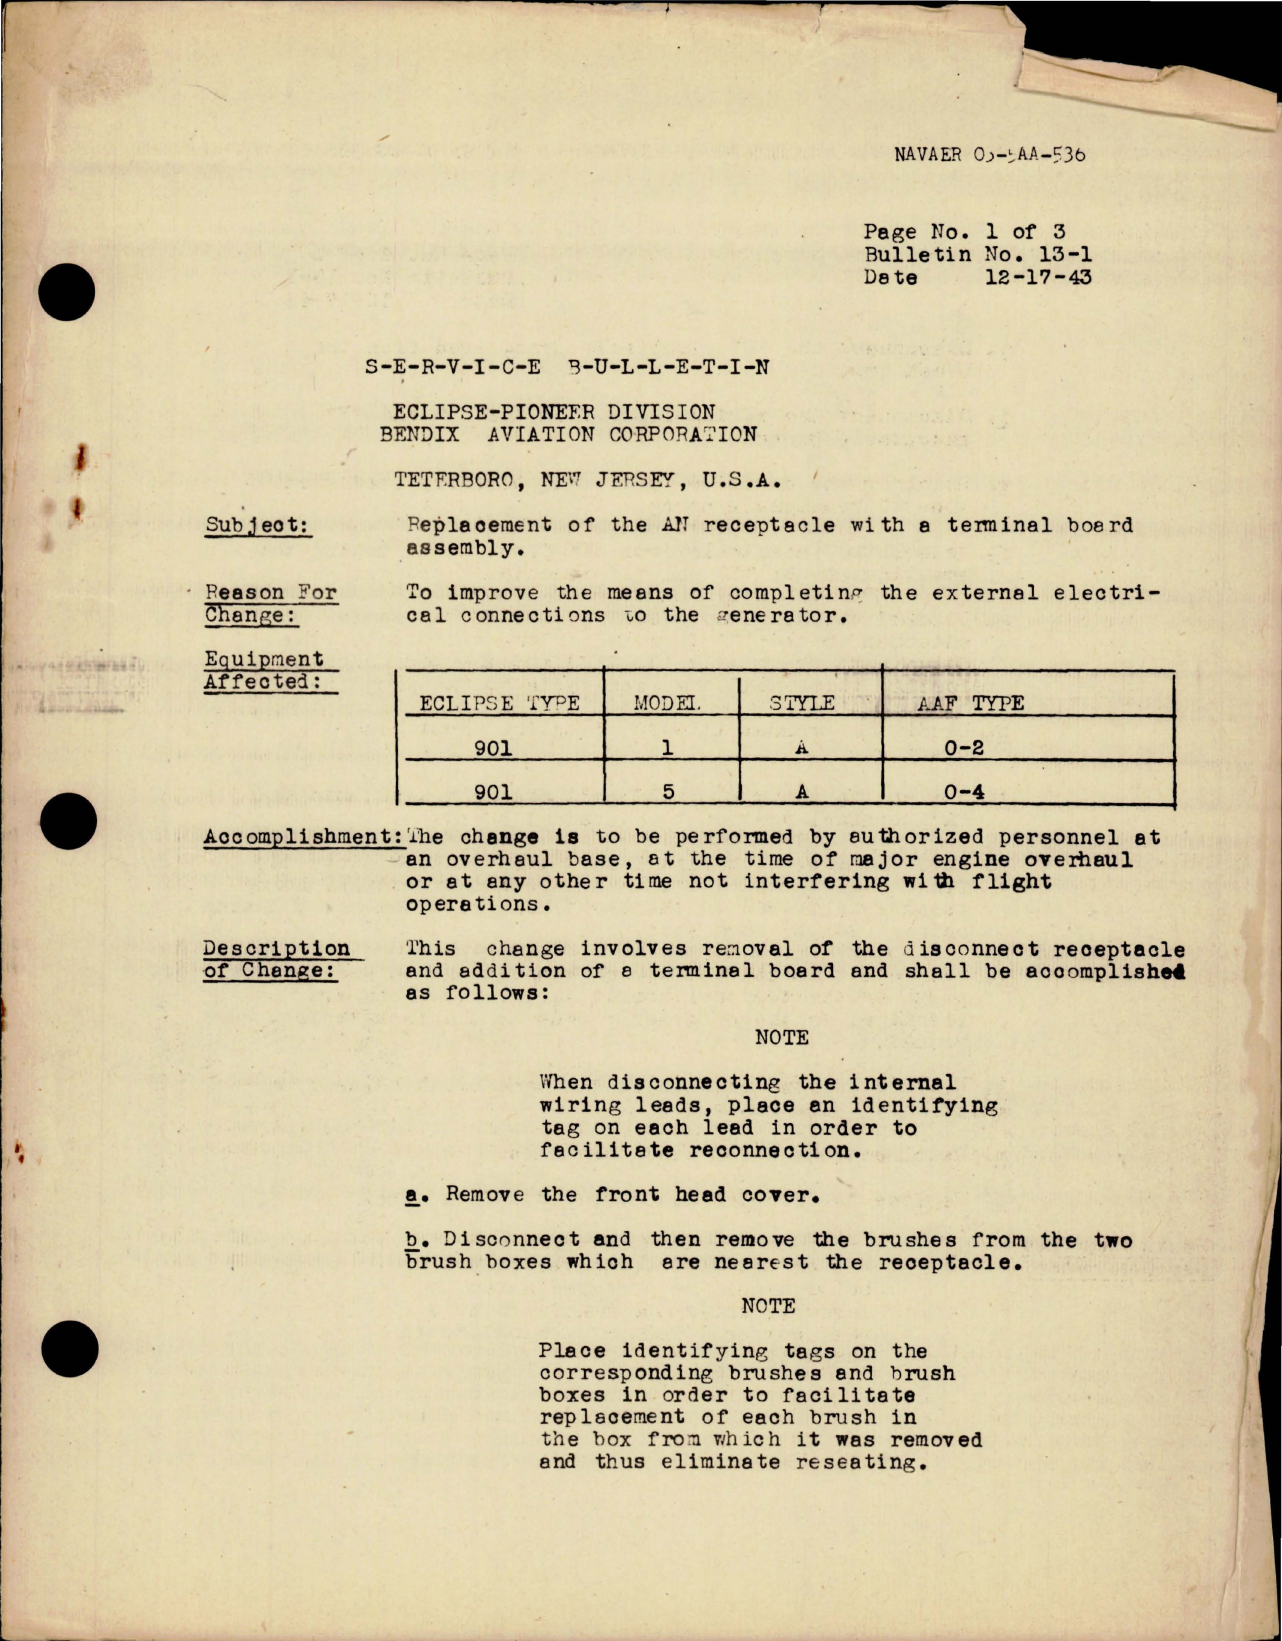 Sample page 1 from AirCorps Library document: Service Bulletin No. 13-1 for Replacement of AN Receptacle with Terminal Board Assembly